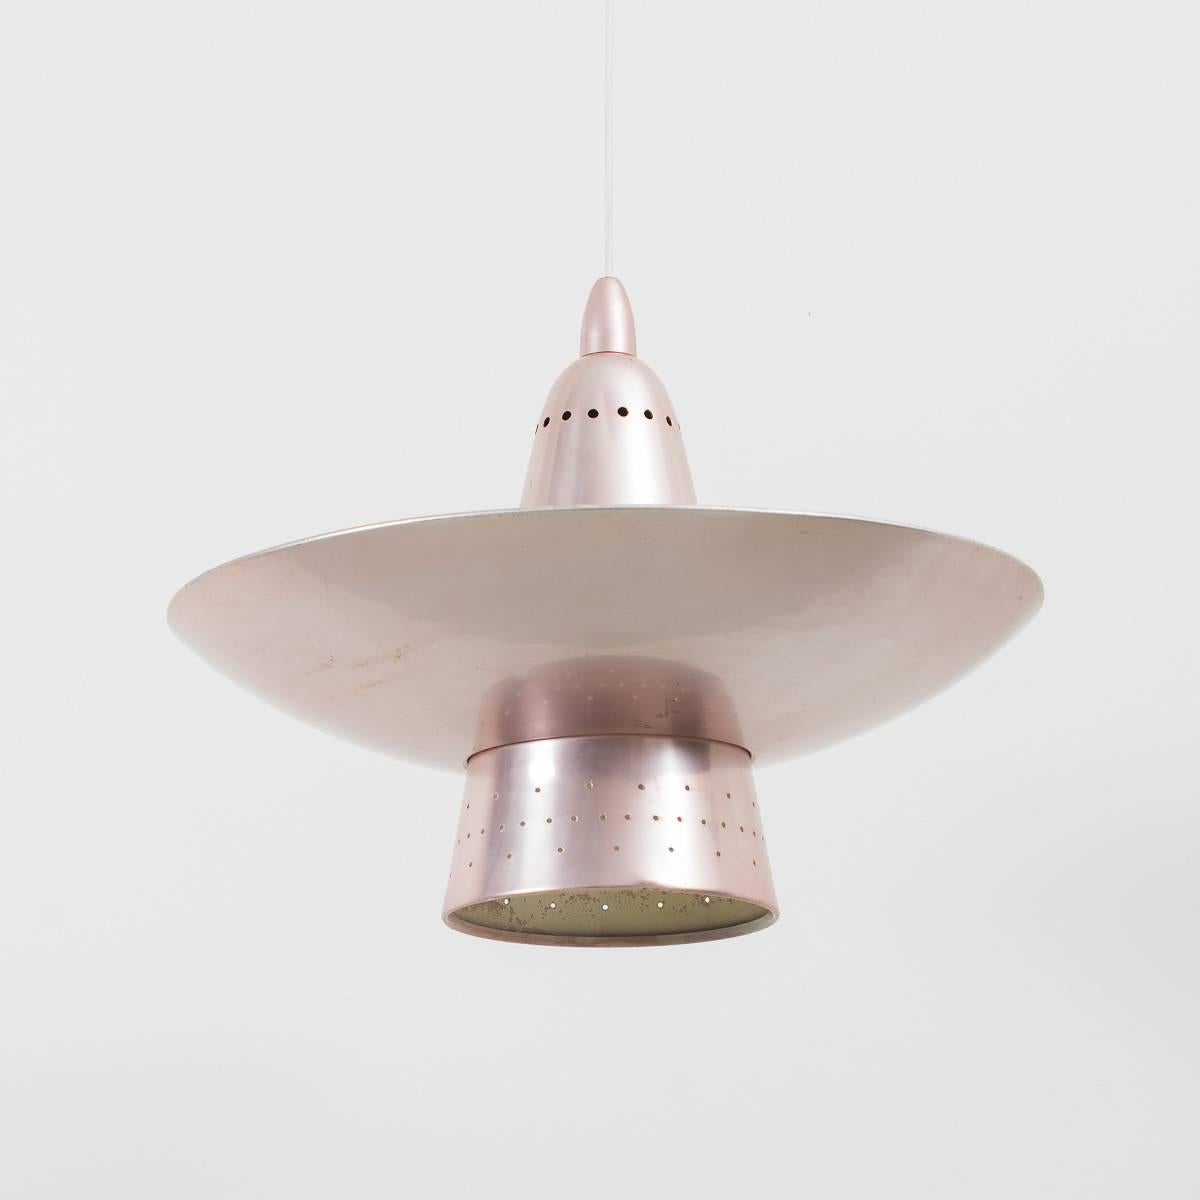 This fabulous pink anodized pendant was reclaimed from St. Thomas’ hospital (London) when it was refurbished years ago. The shade sits over the conical body of the lamp which has sections cut into it so that the light emits up as well as down. The